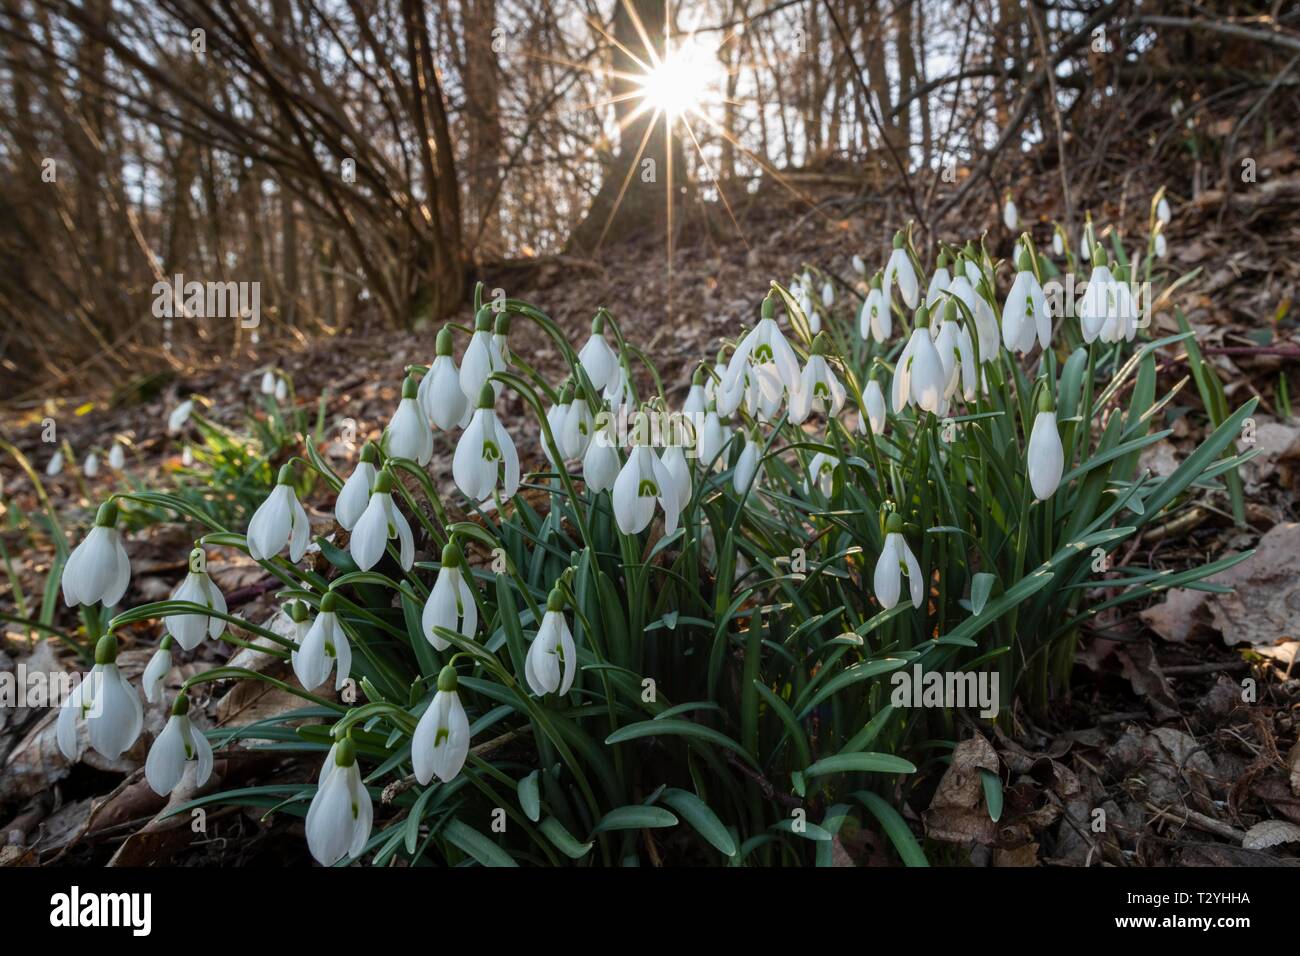 Snowdrop (Galanthus) in the deciduous forest, Hesse, Germany Stock Photo